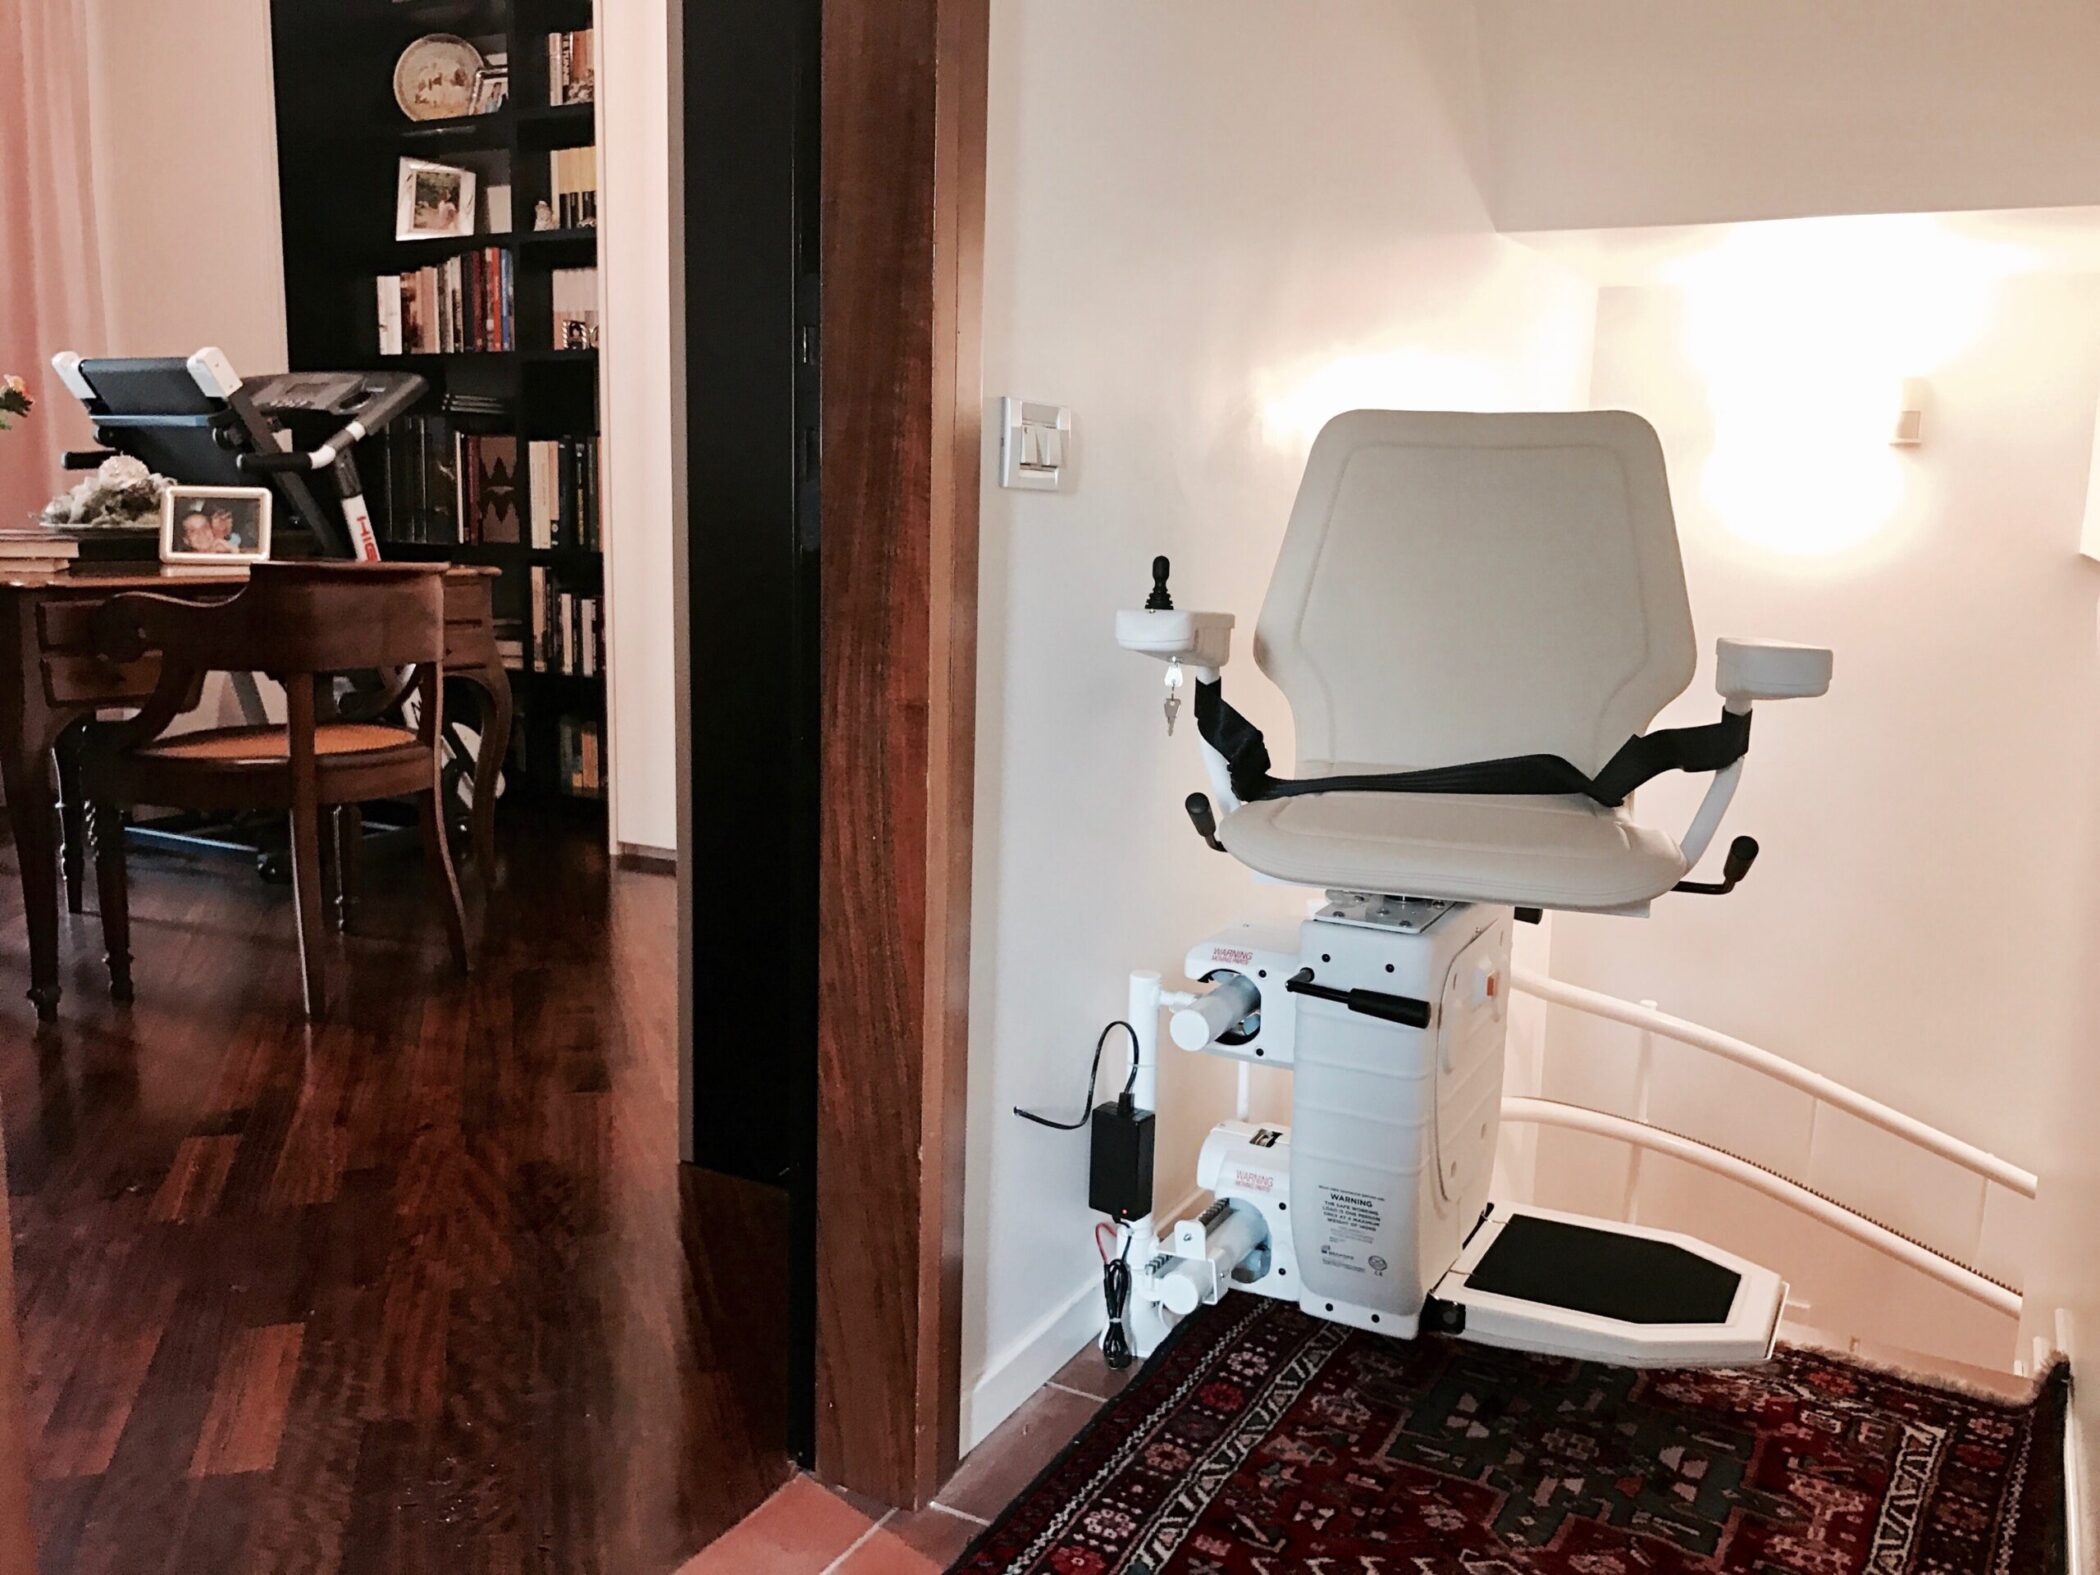 A stair lift inside a home